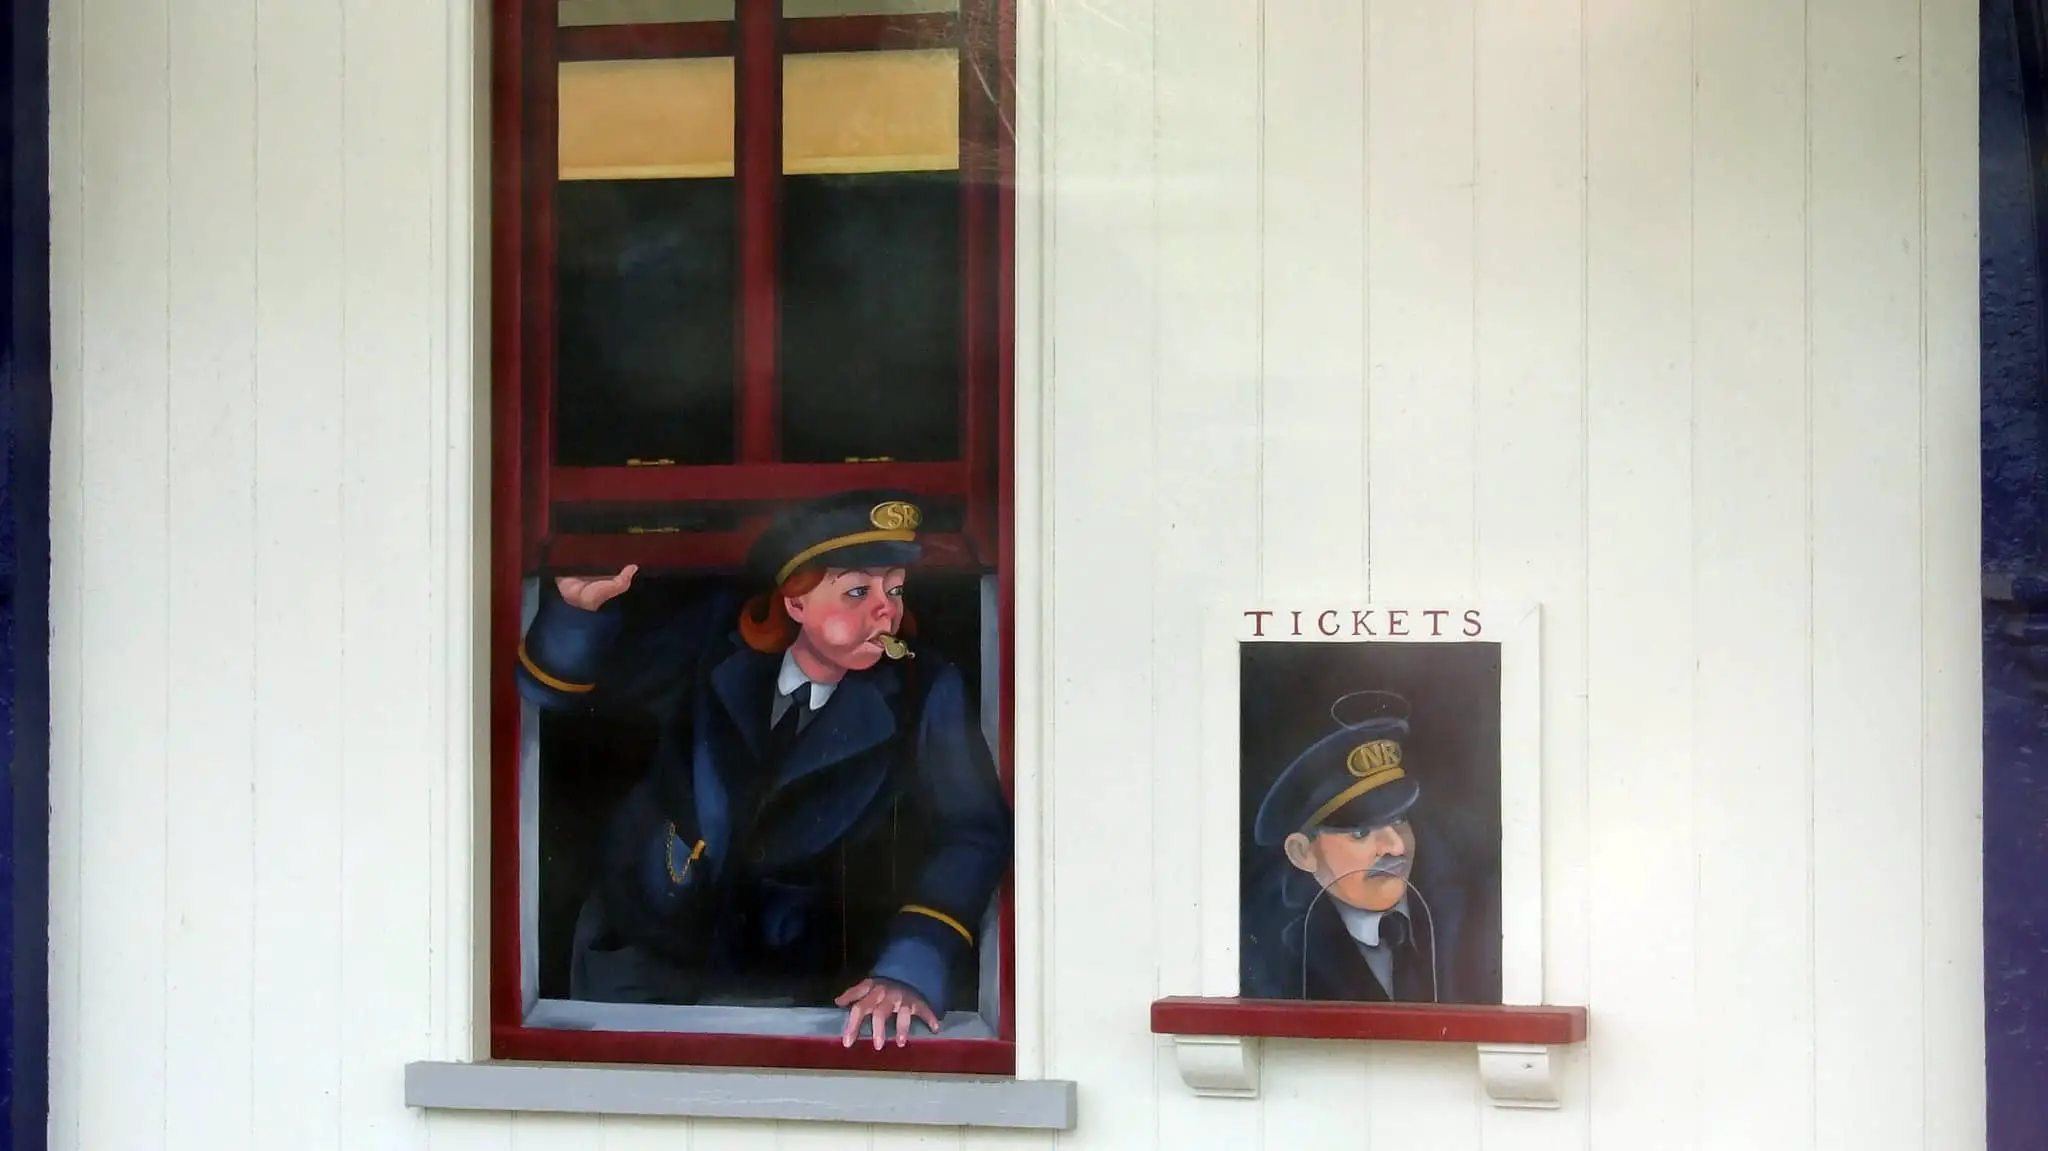 Painting of railway staff at ticket office windows